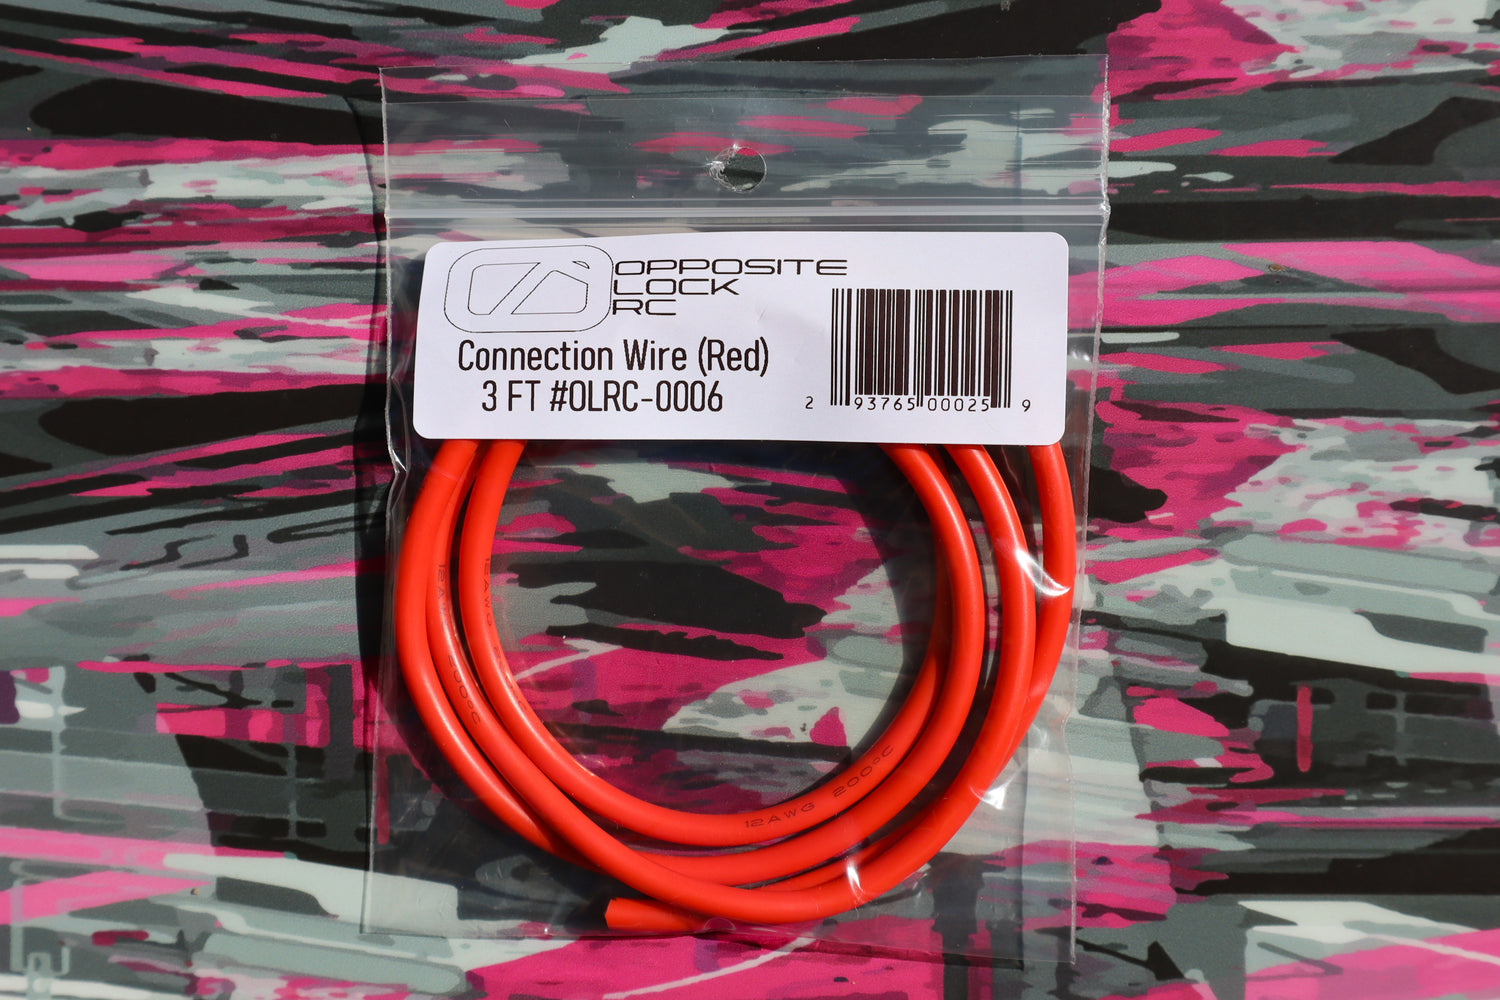 OLRC Connection Wire (Red) 3FT